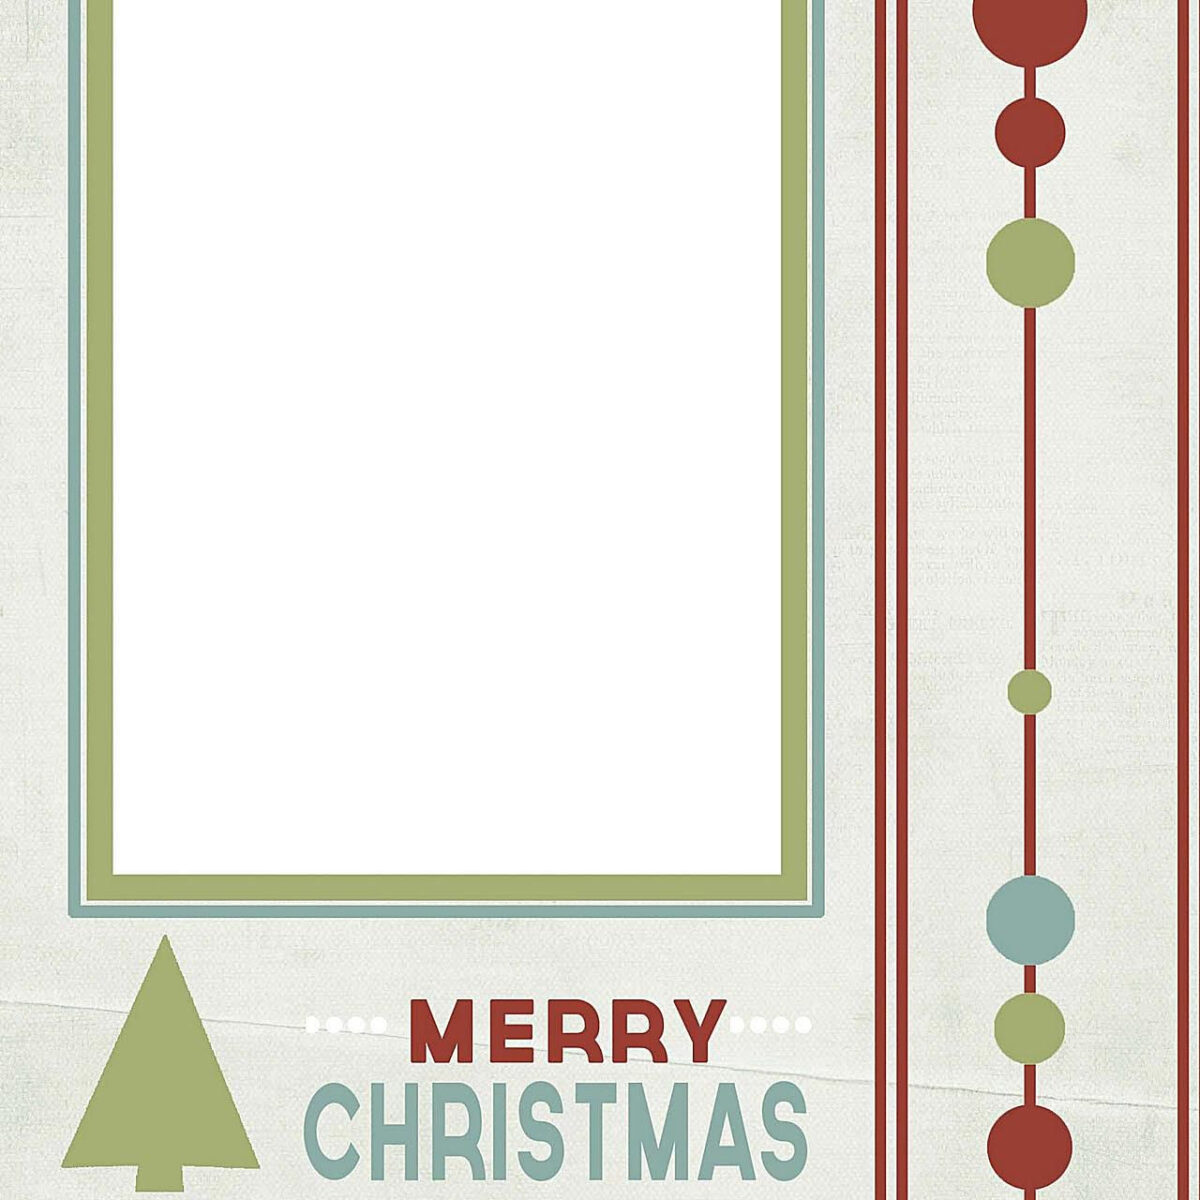 photoshop christmas card templates free download